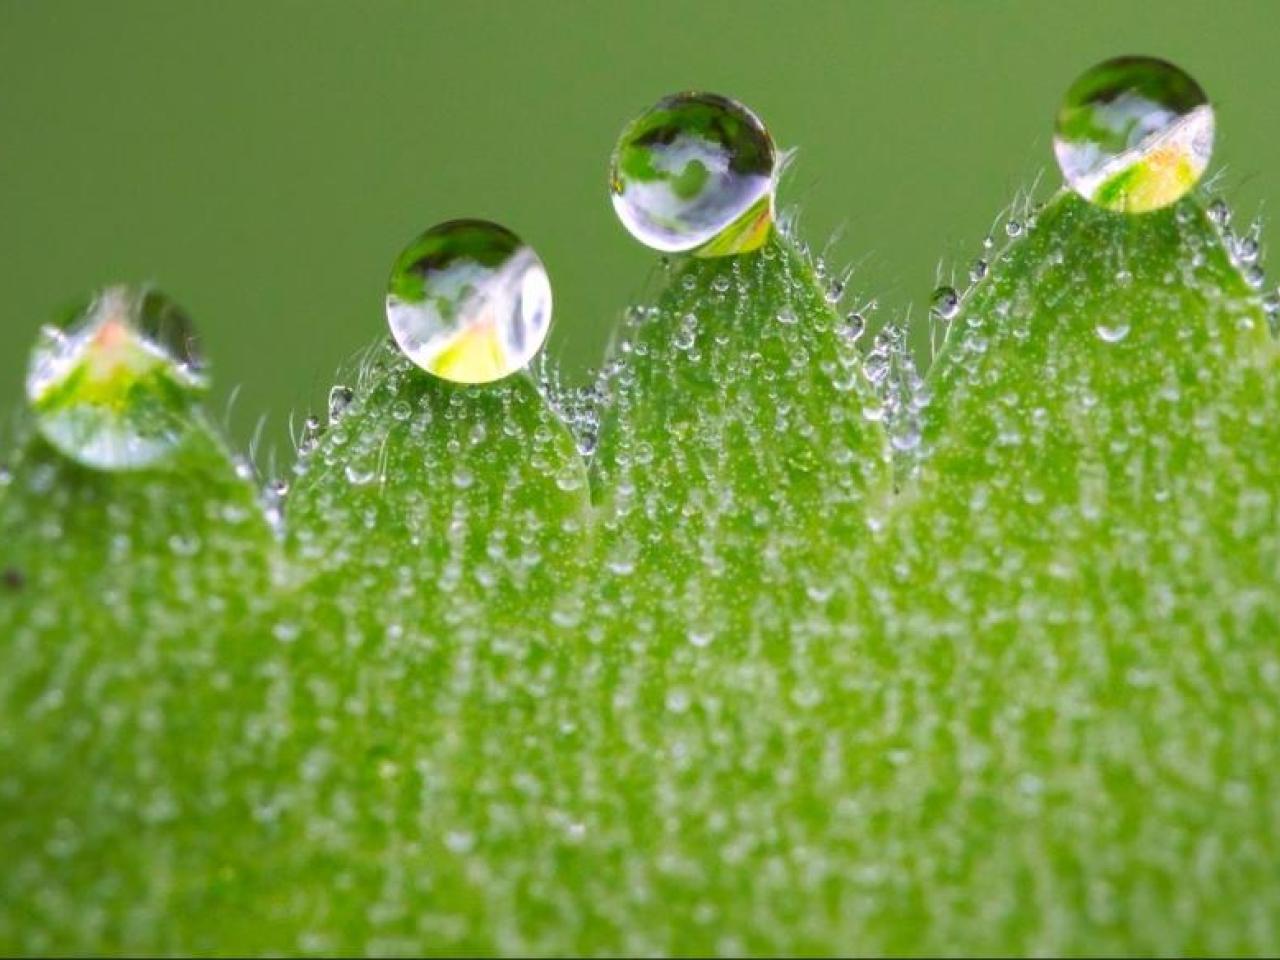 A close-up of dew drops on a green leaf.